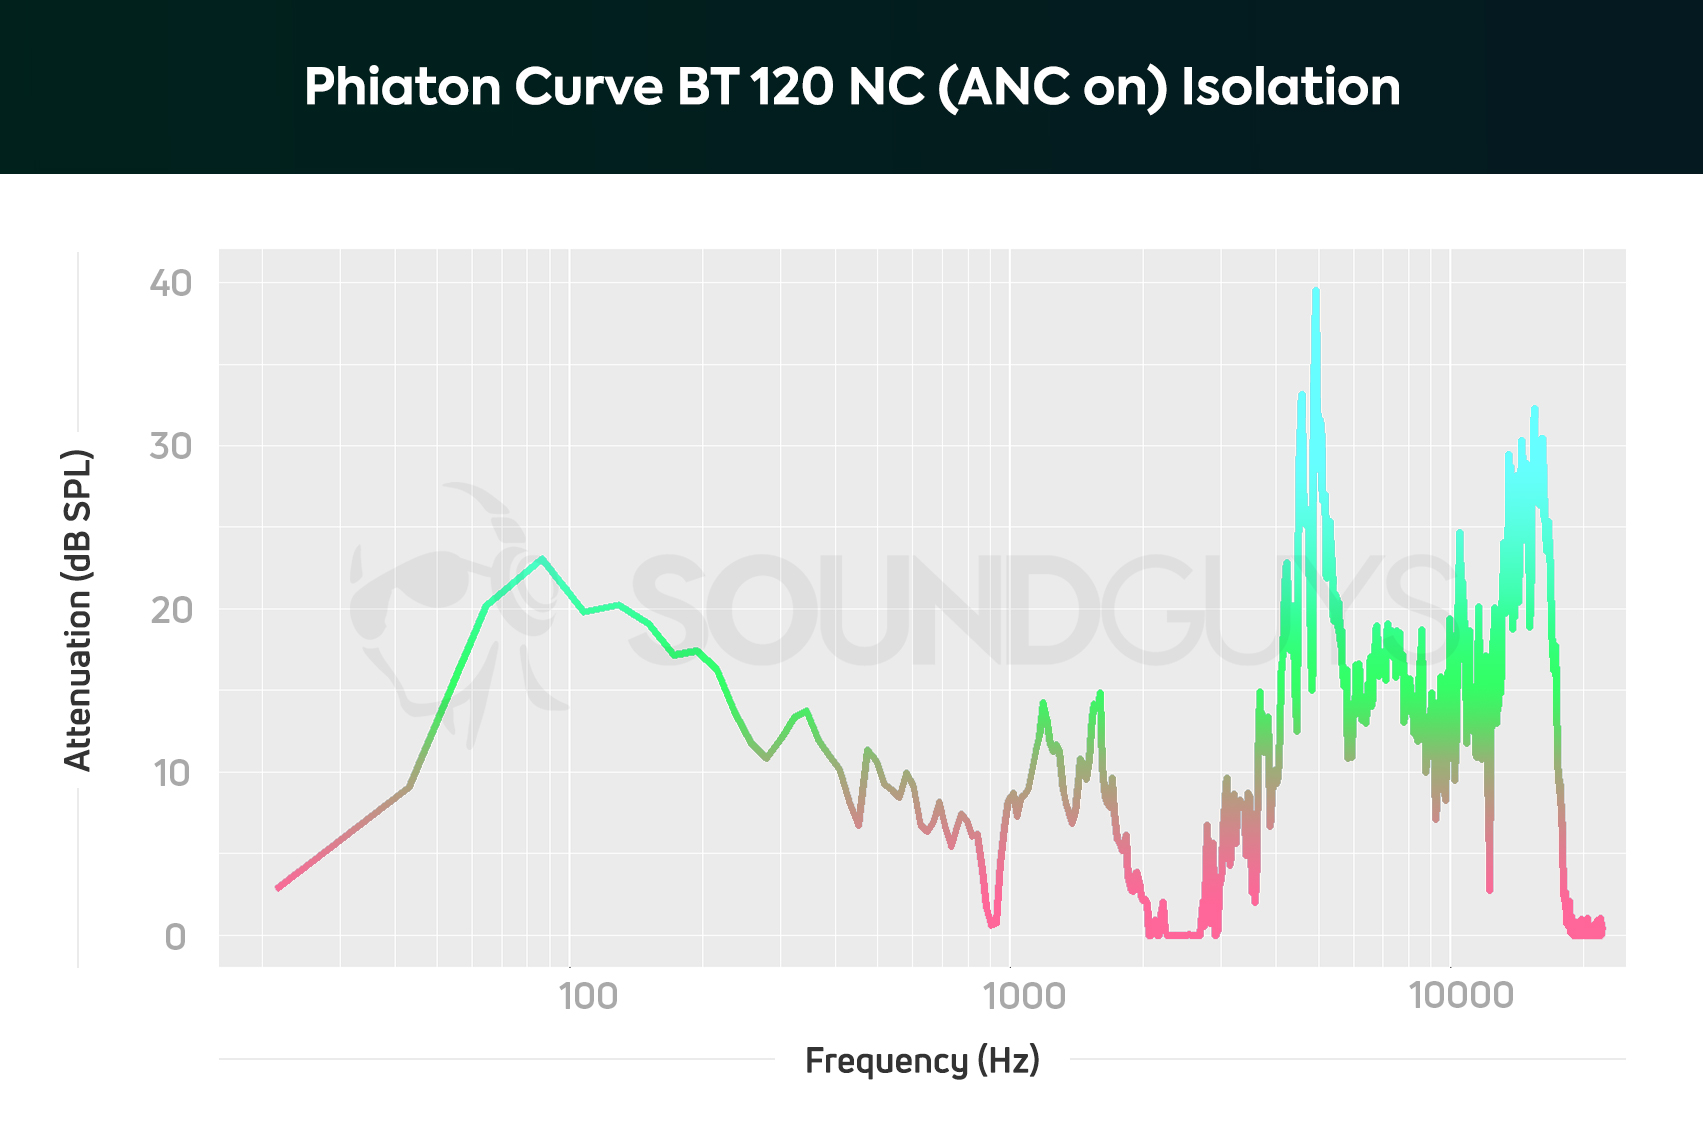 An isolation chart of the Phiaton Curve BT 120 NC with noise canceling turned on.